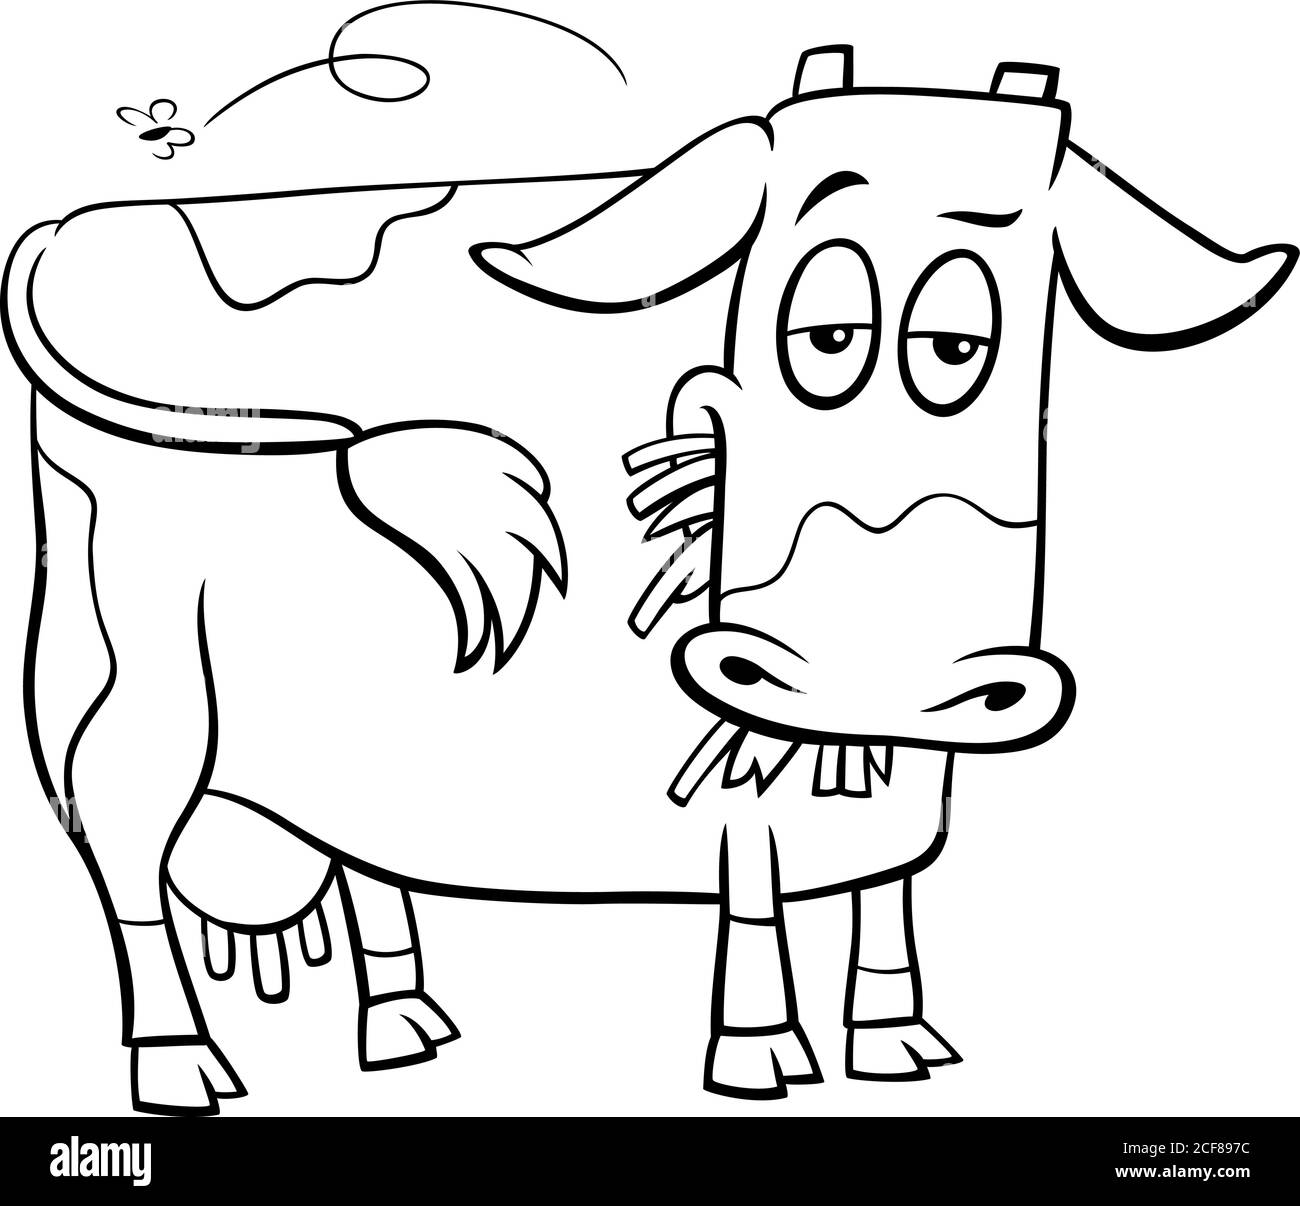 Black and White Cartoon Illustration of Spotted Cow Farm Animal Character Coloring Book Stock Vector